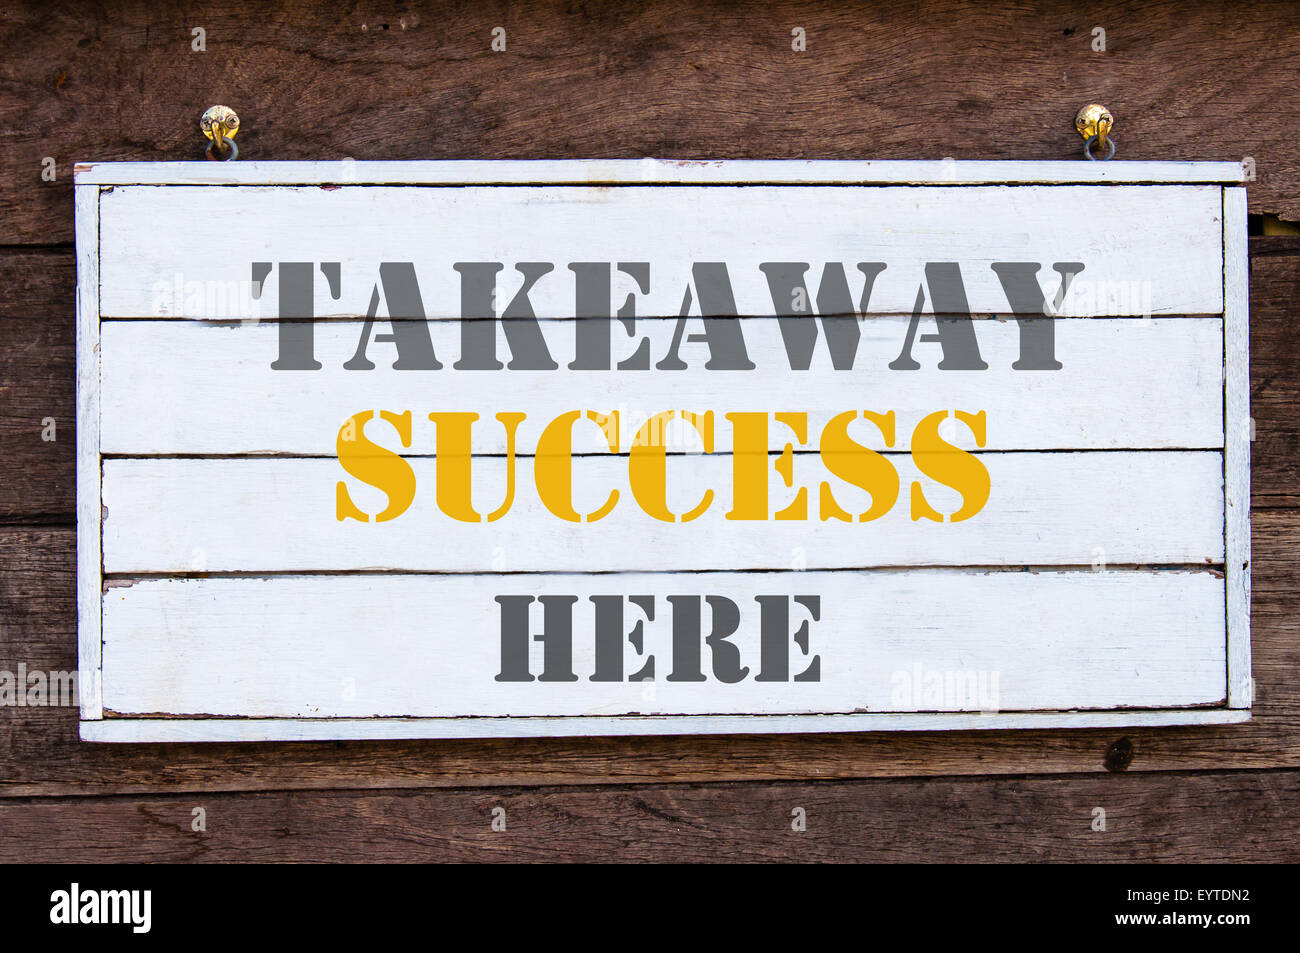 Takeaway Success Here Inspirational message written on vintage wooden board. Motivation concept image Stock Photo